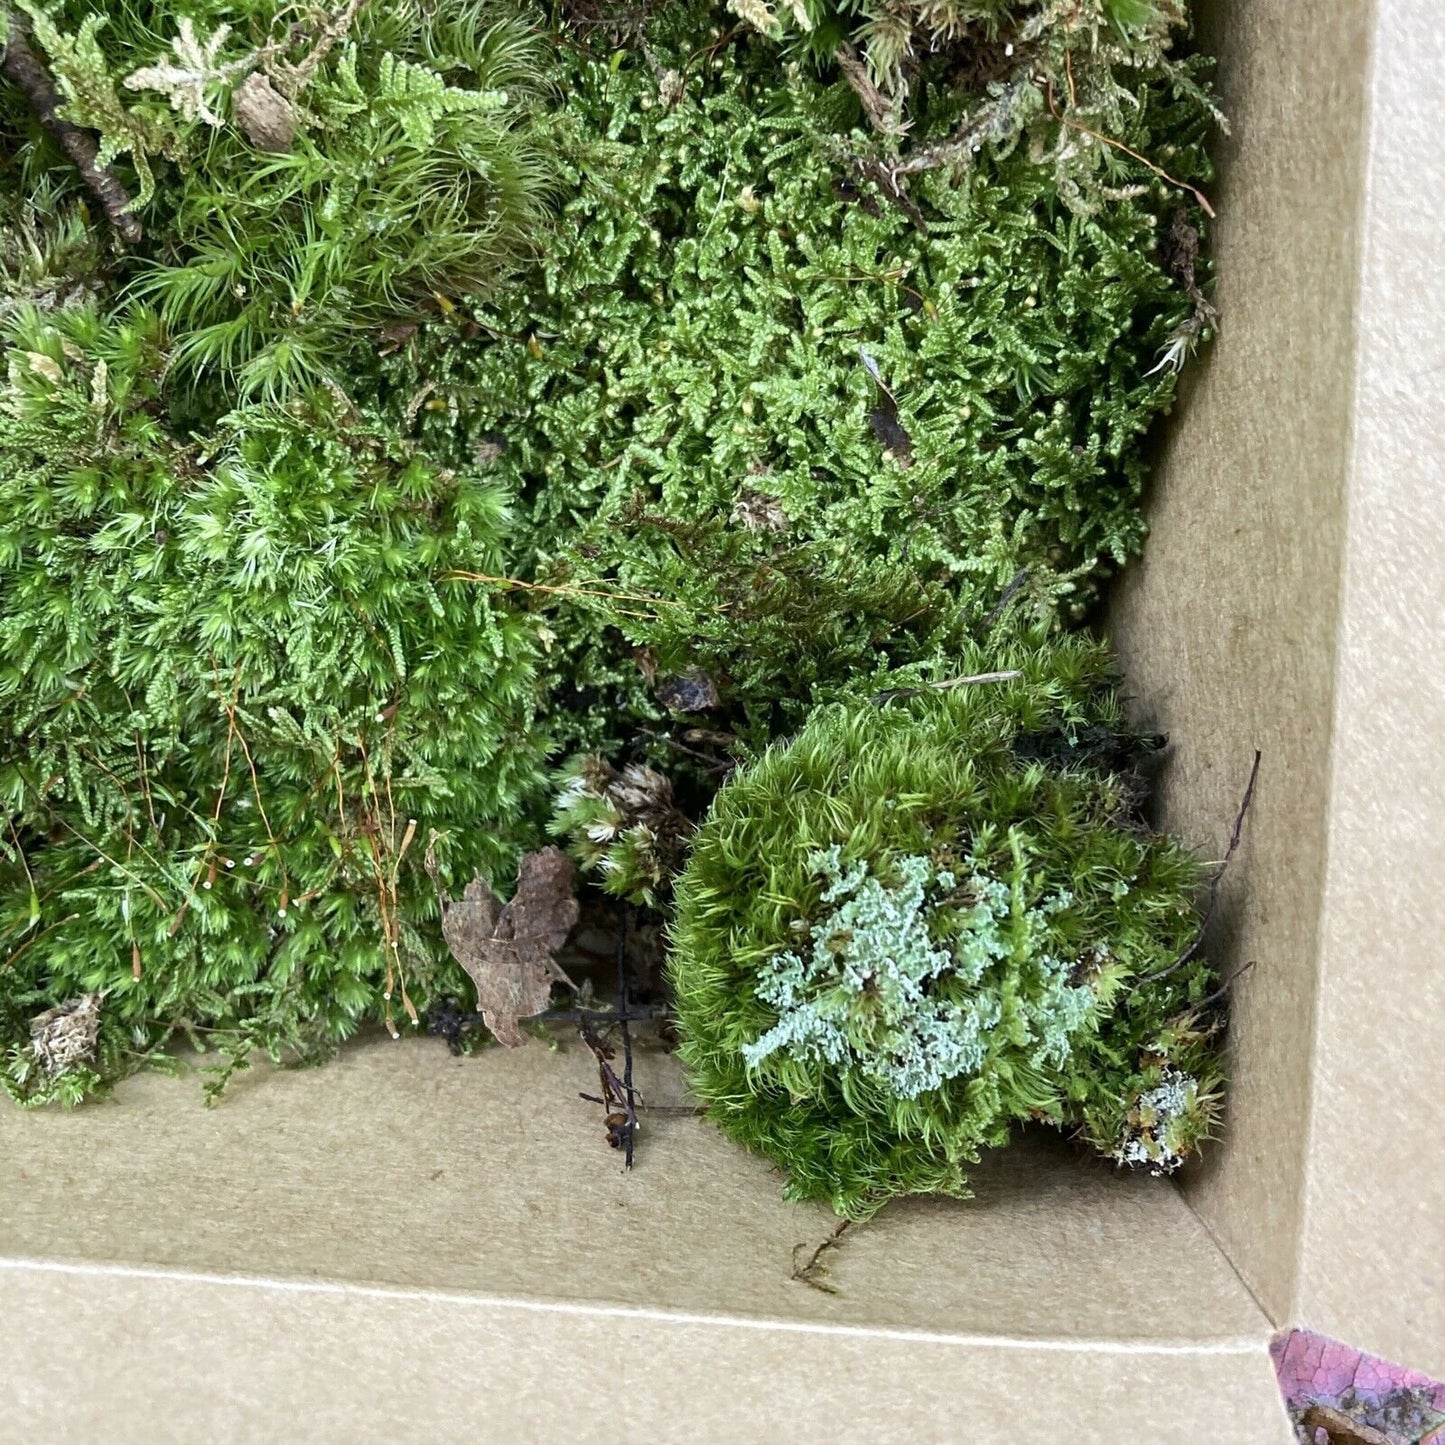 5 Live Mosses and Lichens for Terrariums! - Gulley Greenhouse